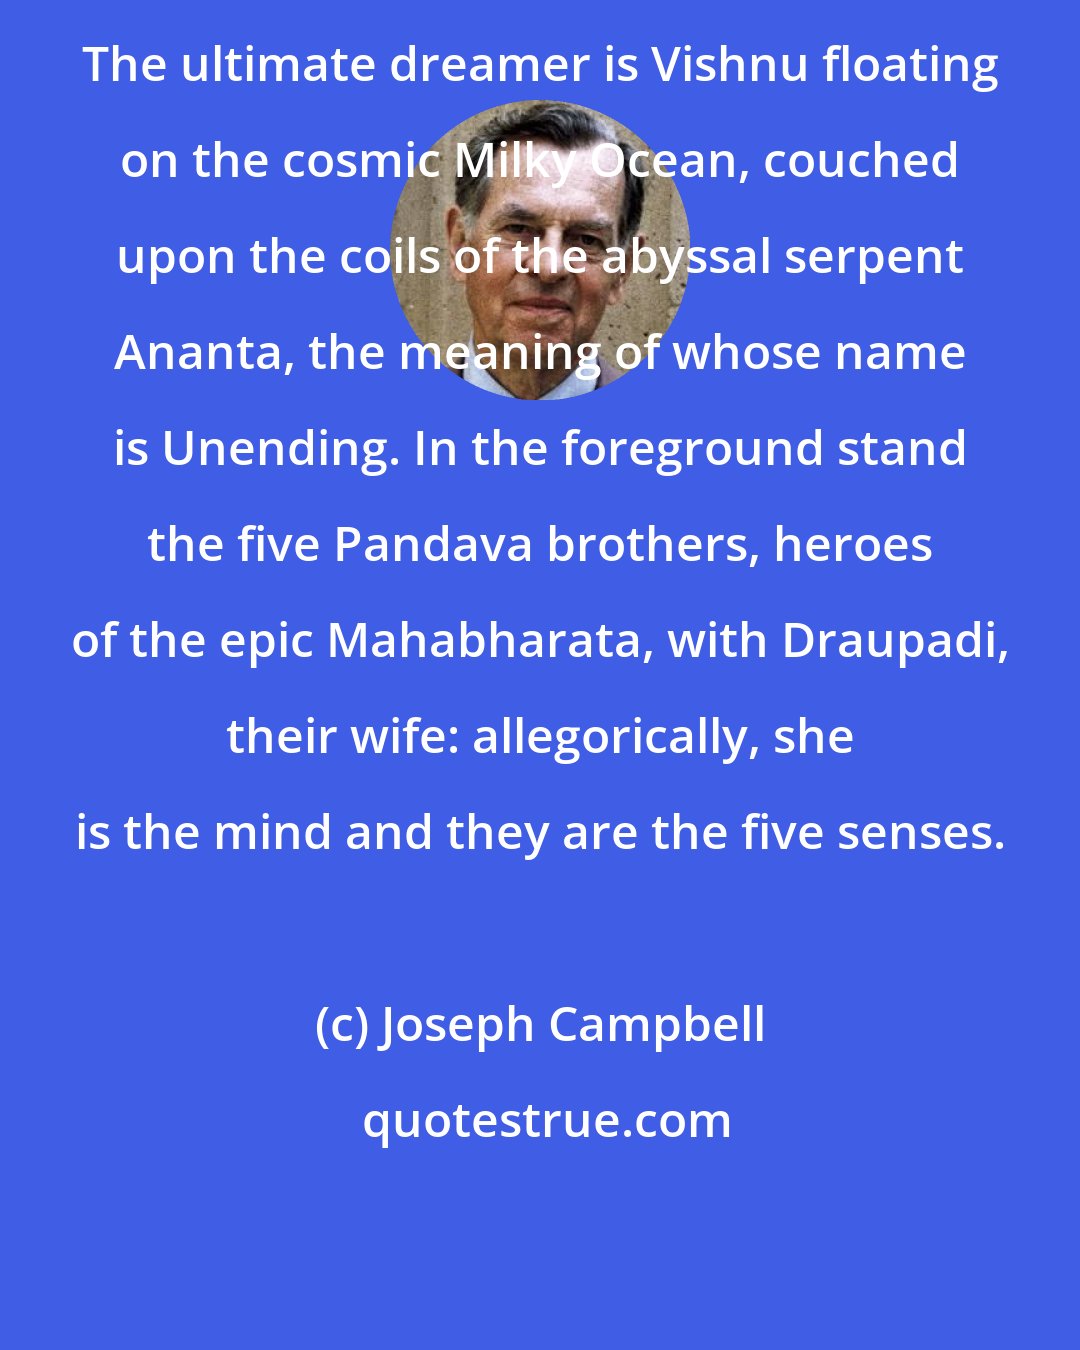 Joseph Campbell: The ultimate dreamer is Vishnu floating on the cosmic Milky Ocean, couched upon the coils of the abyssal serpent Ananta, the meaning of whose name is Unending. In the foreground stand the five Pandava brothers, heroes of the epic Mahabharata, with Draupadi, their wife: allegorically, she is the mind and they are the five senses.